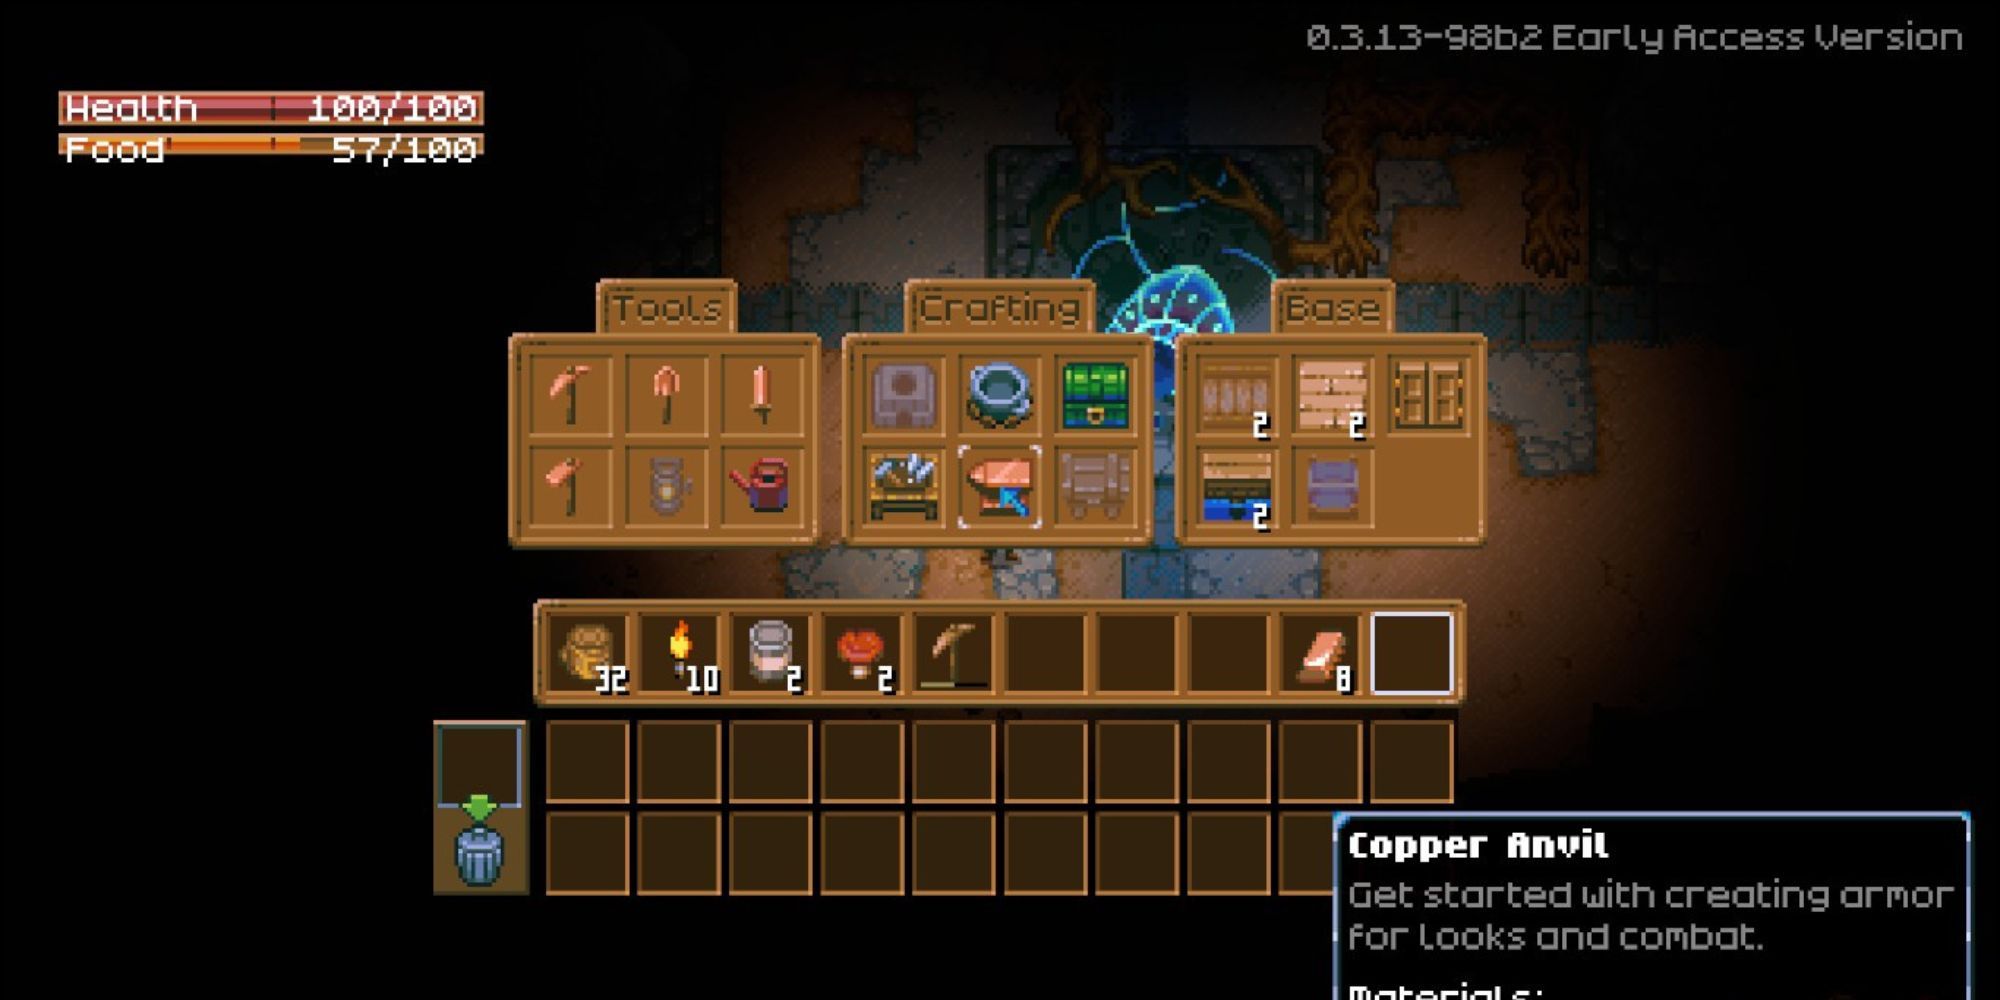 The Copper Anvil on Corekeeper